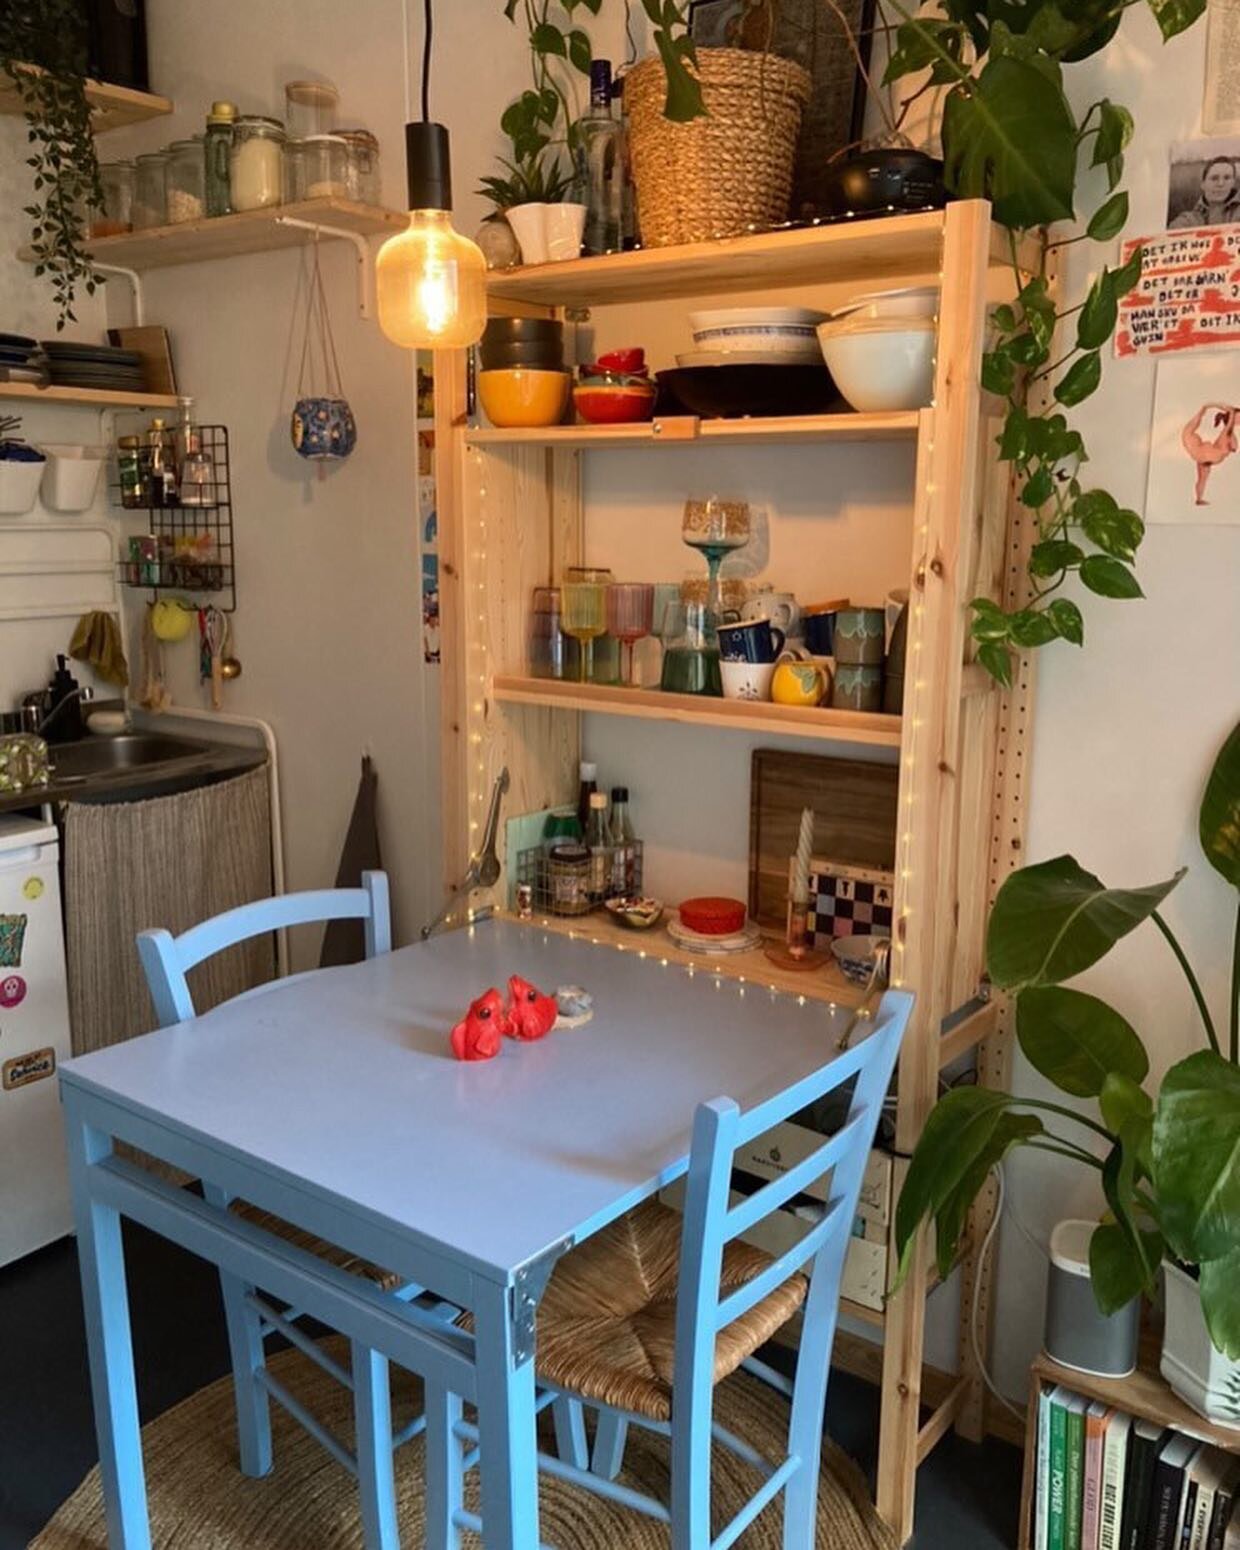 More great solutions from @emilie_ssupersstar s tiny home in @cphvillage Vesterbro✨The blue dining area is defined by painted chairs + part of the foldable table and it works so well! Cool to see how colours can help create the different zones in the